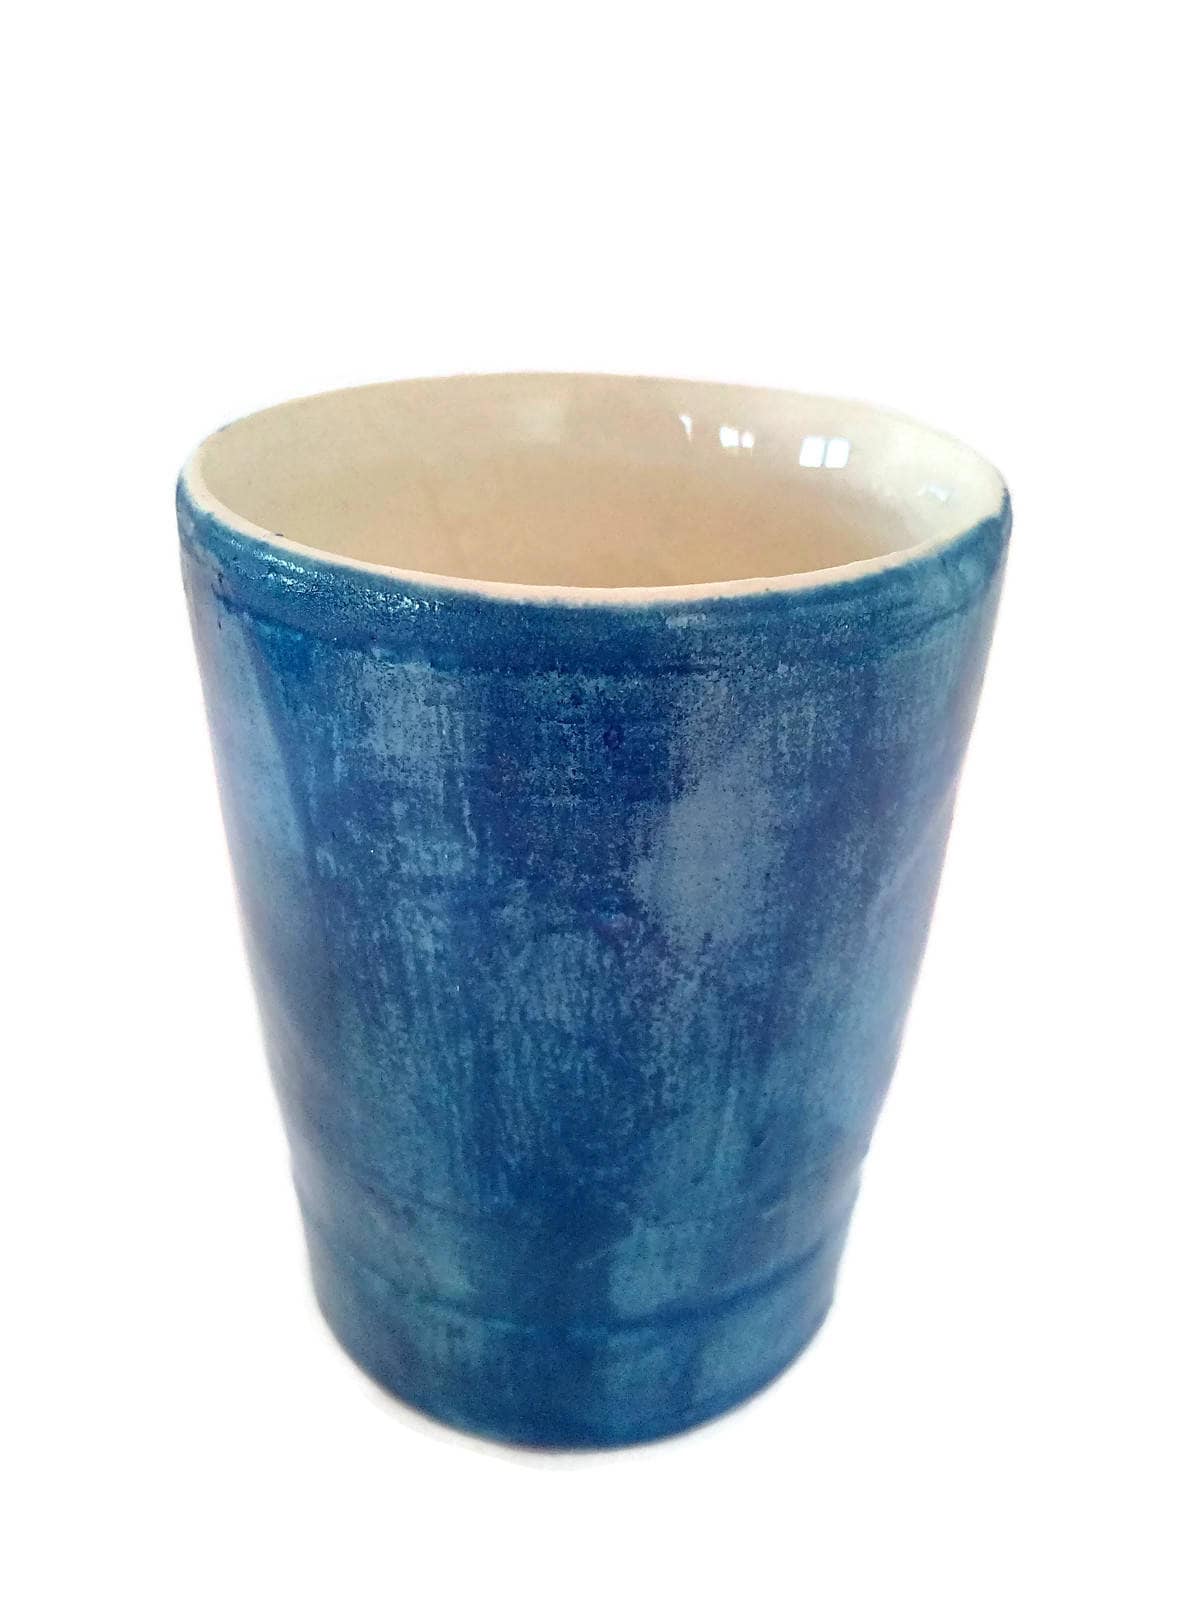 CERAMIC TUMBLER No HANDLE, Coffee Mug Handmade Pottery, Best Gifts For Him, Valentines Day Gift, Housewarming Gift First Home, Keep Cup - Ceramica Ana Rafael